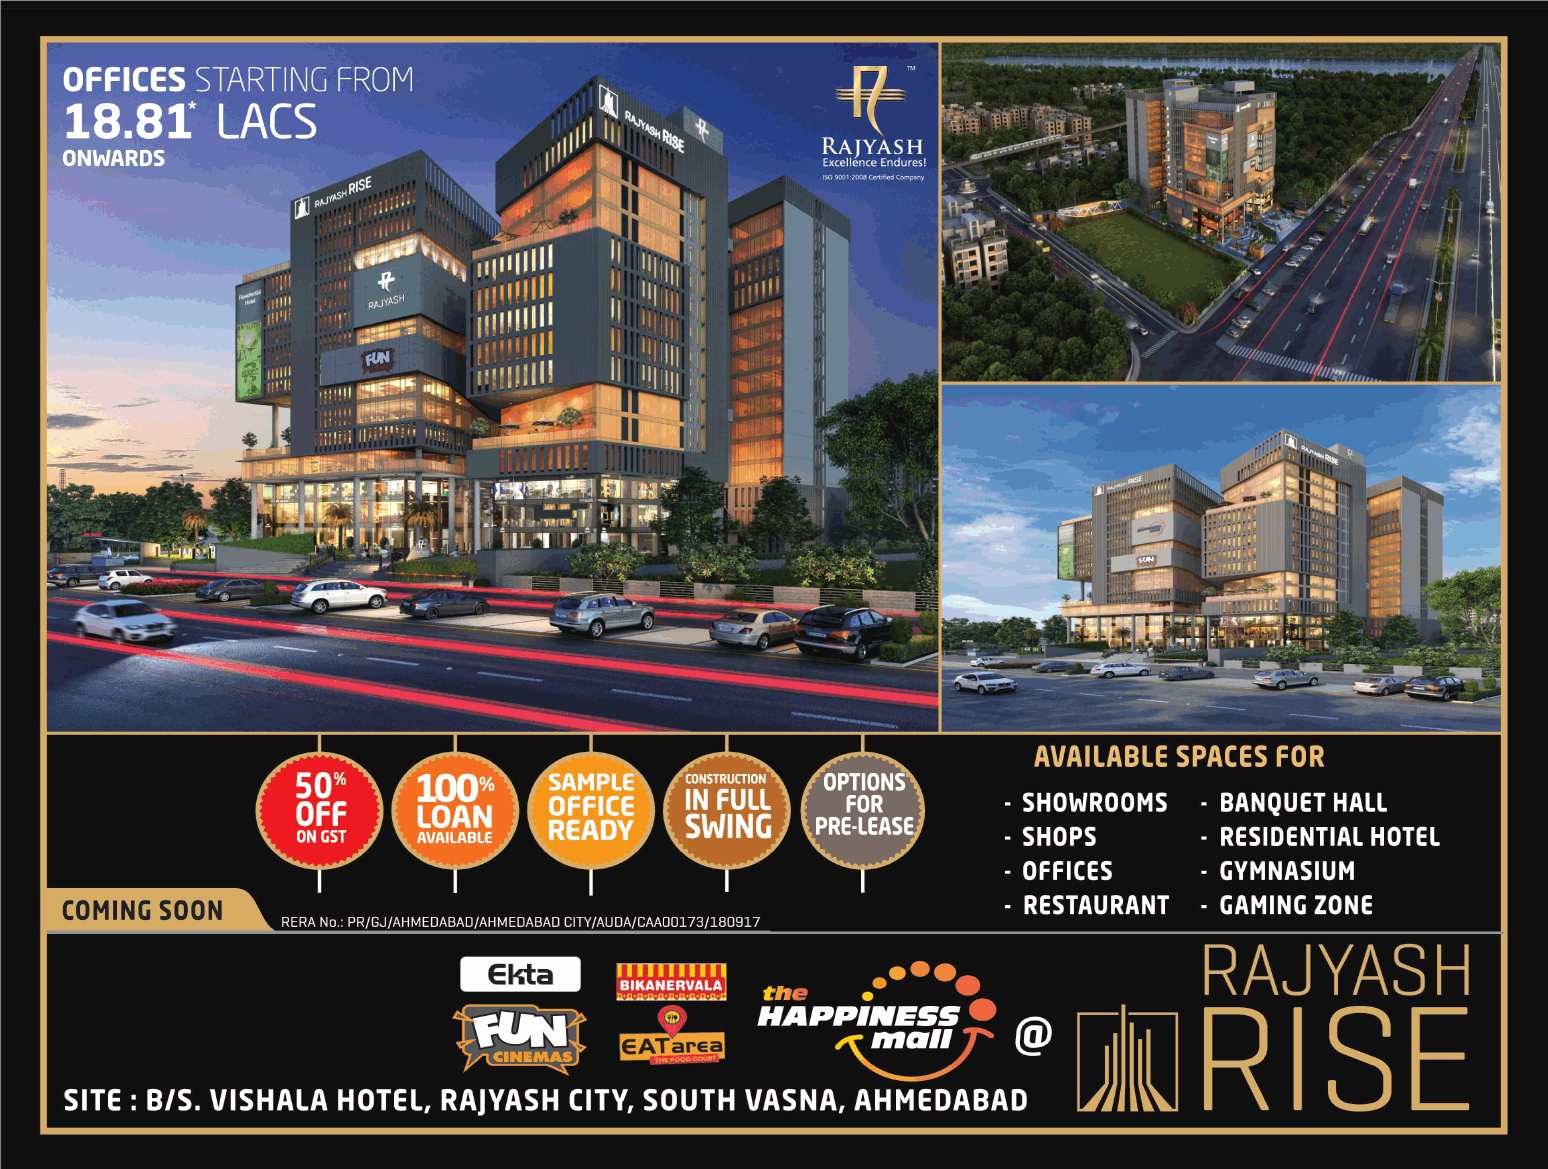 Book offices @ Rs. 18.81 Lacs at Rajyash Rise in Ahmedabad